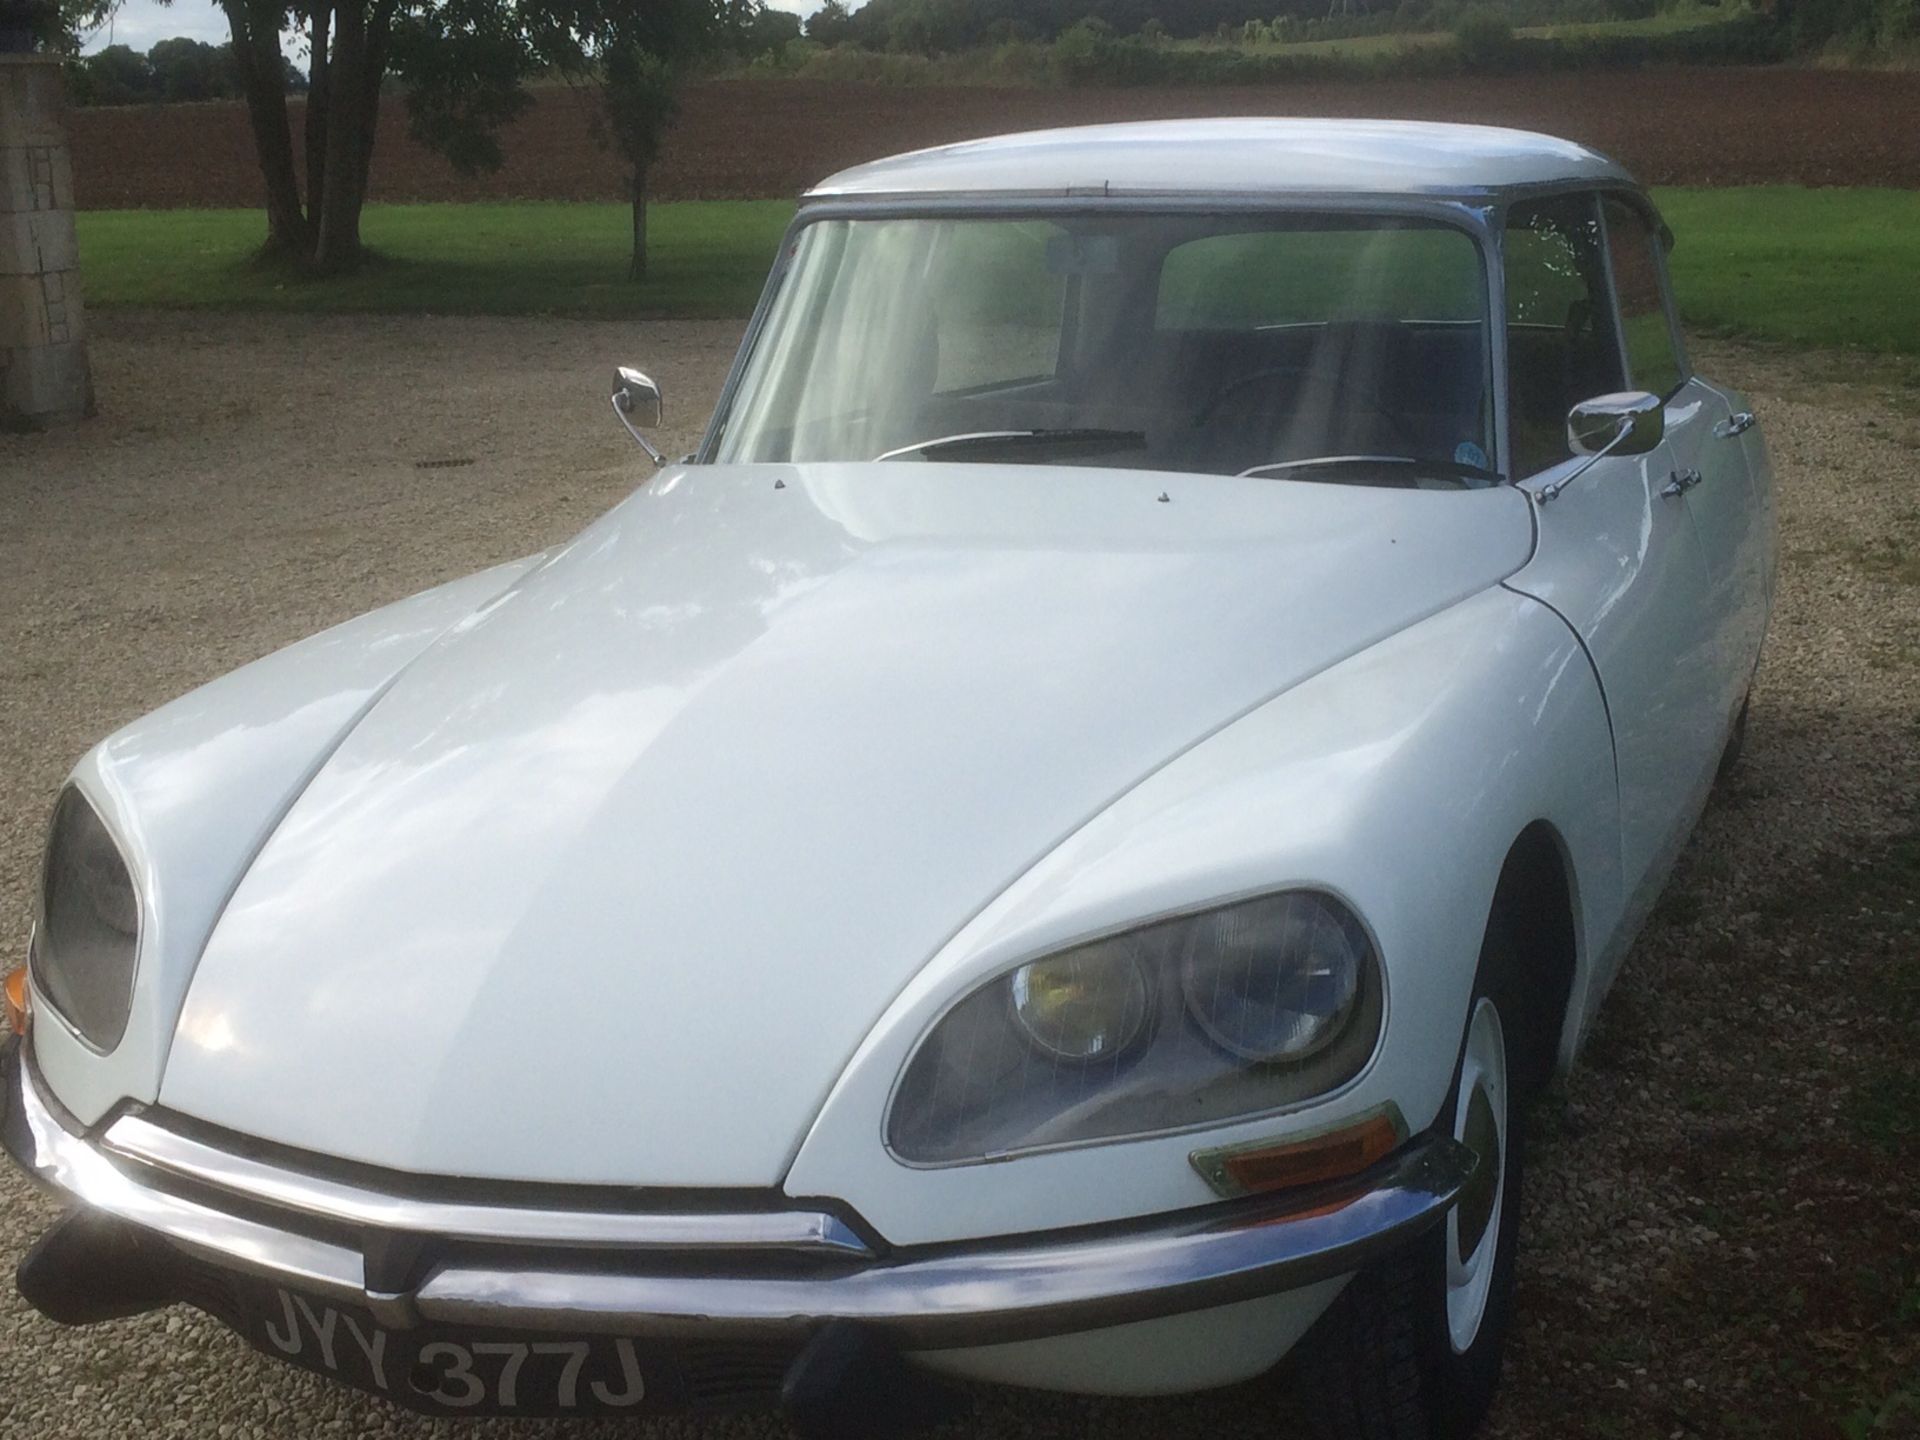 1971 Citroen DS19 D Special Series B - Image 2 of 11